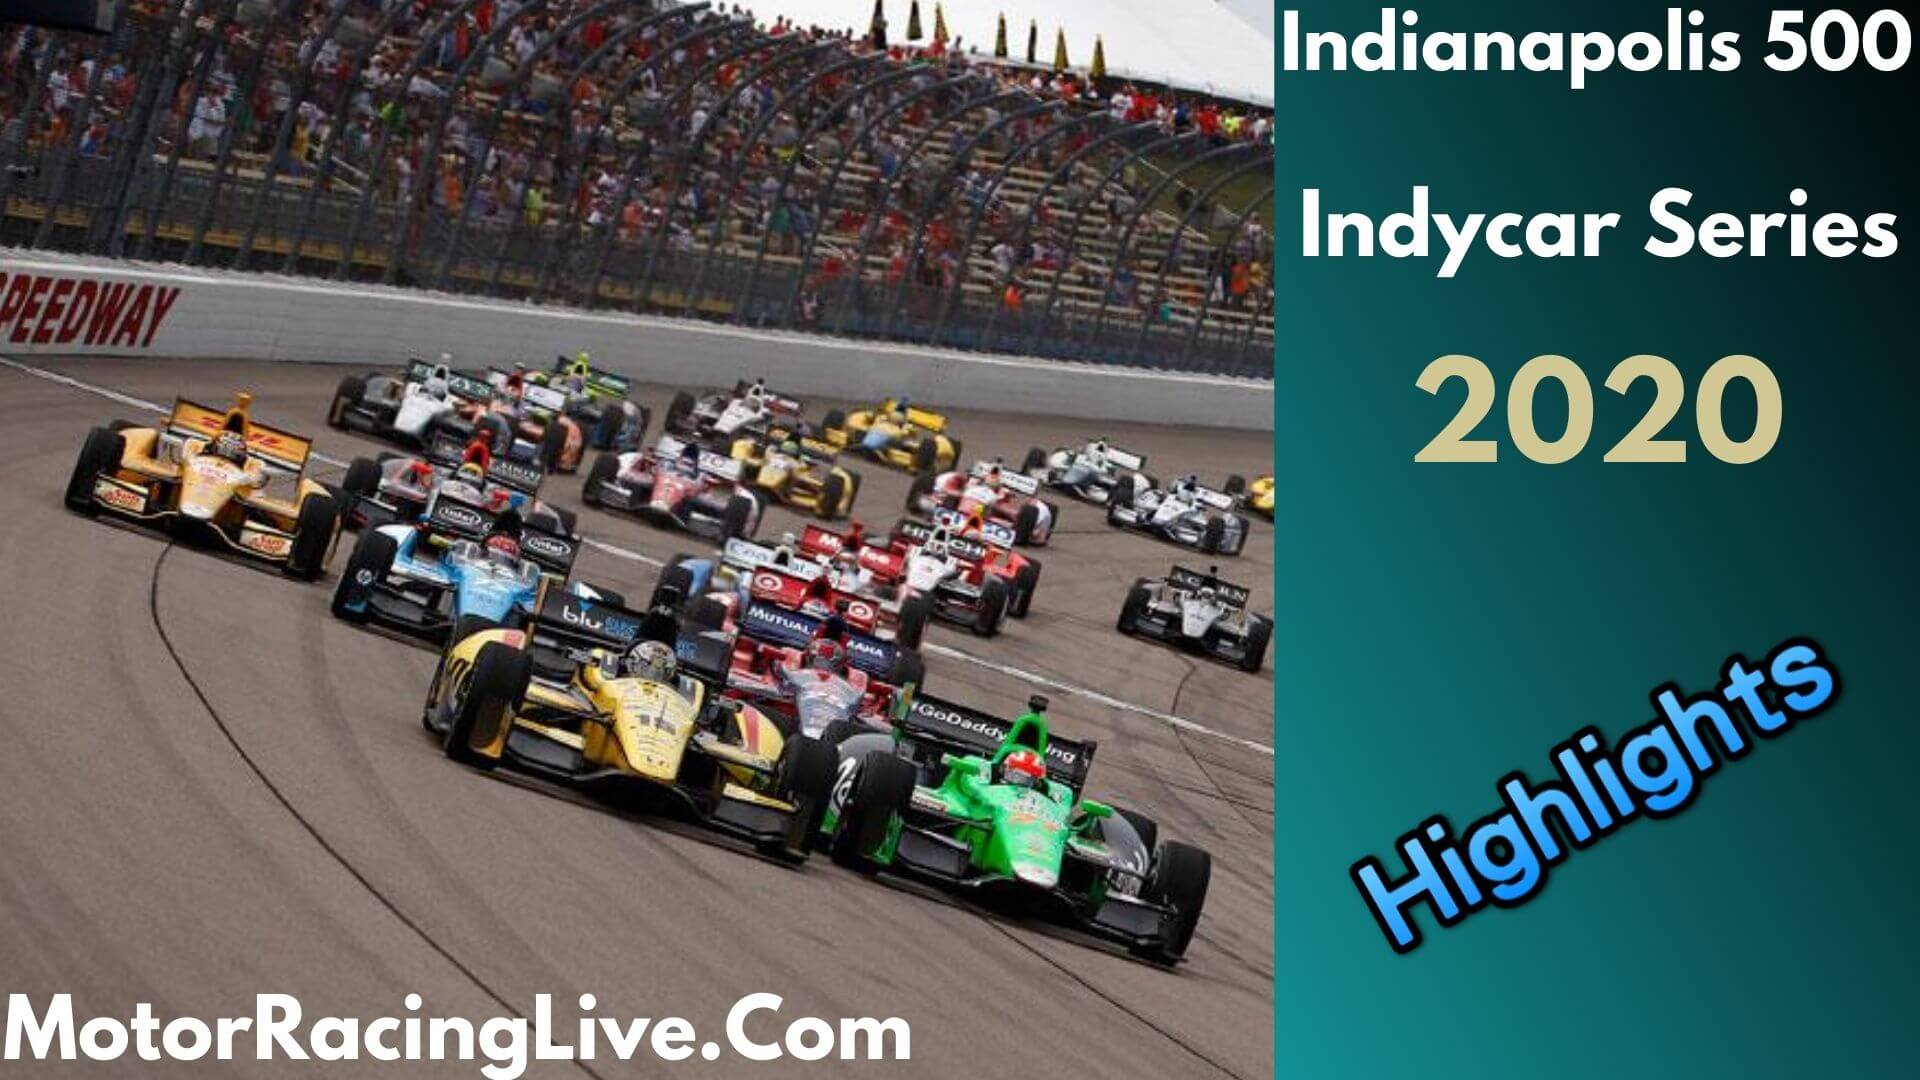 Indianapolis 500 Highlights Indycar 2020